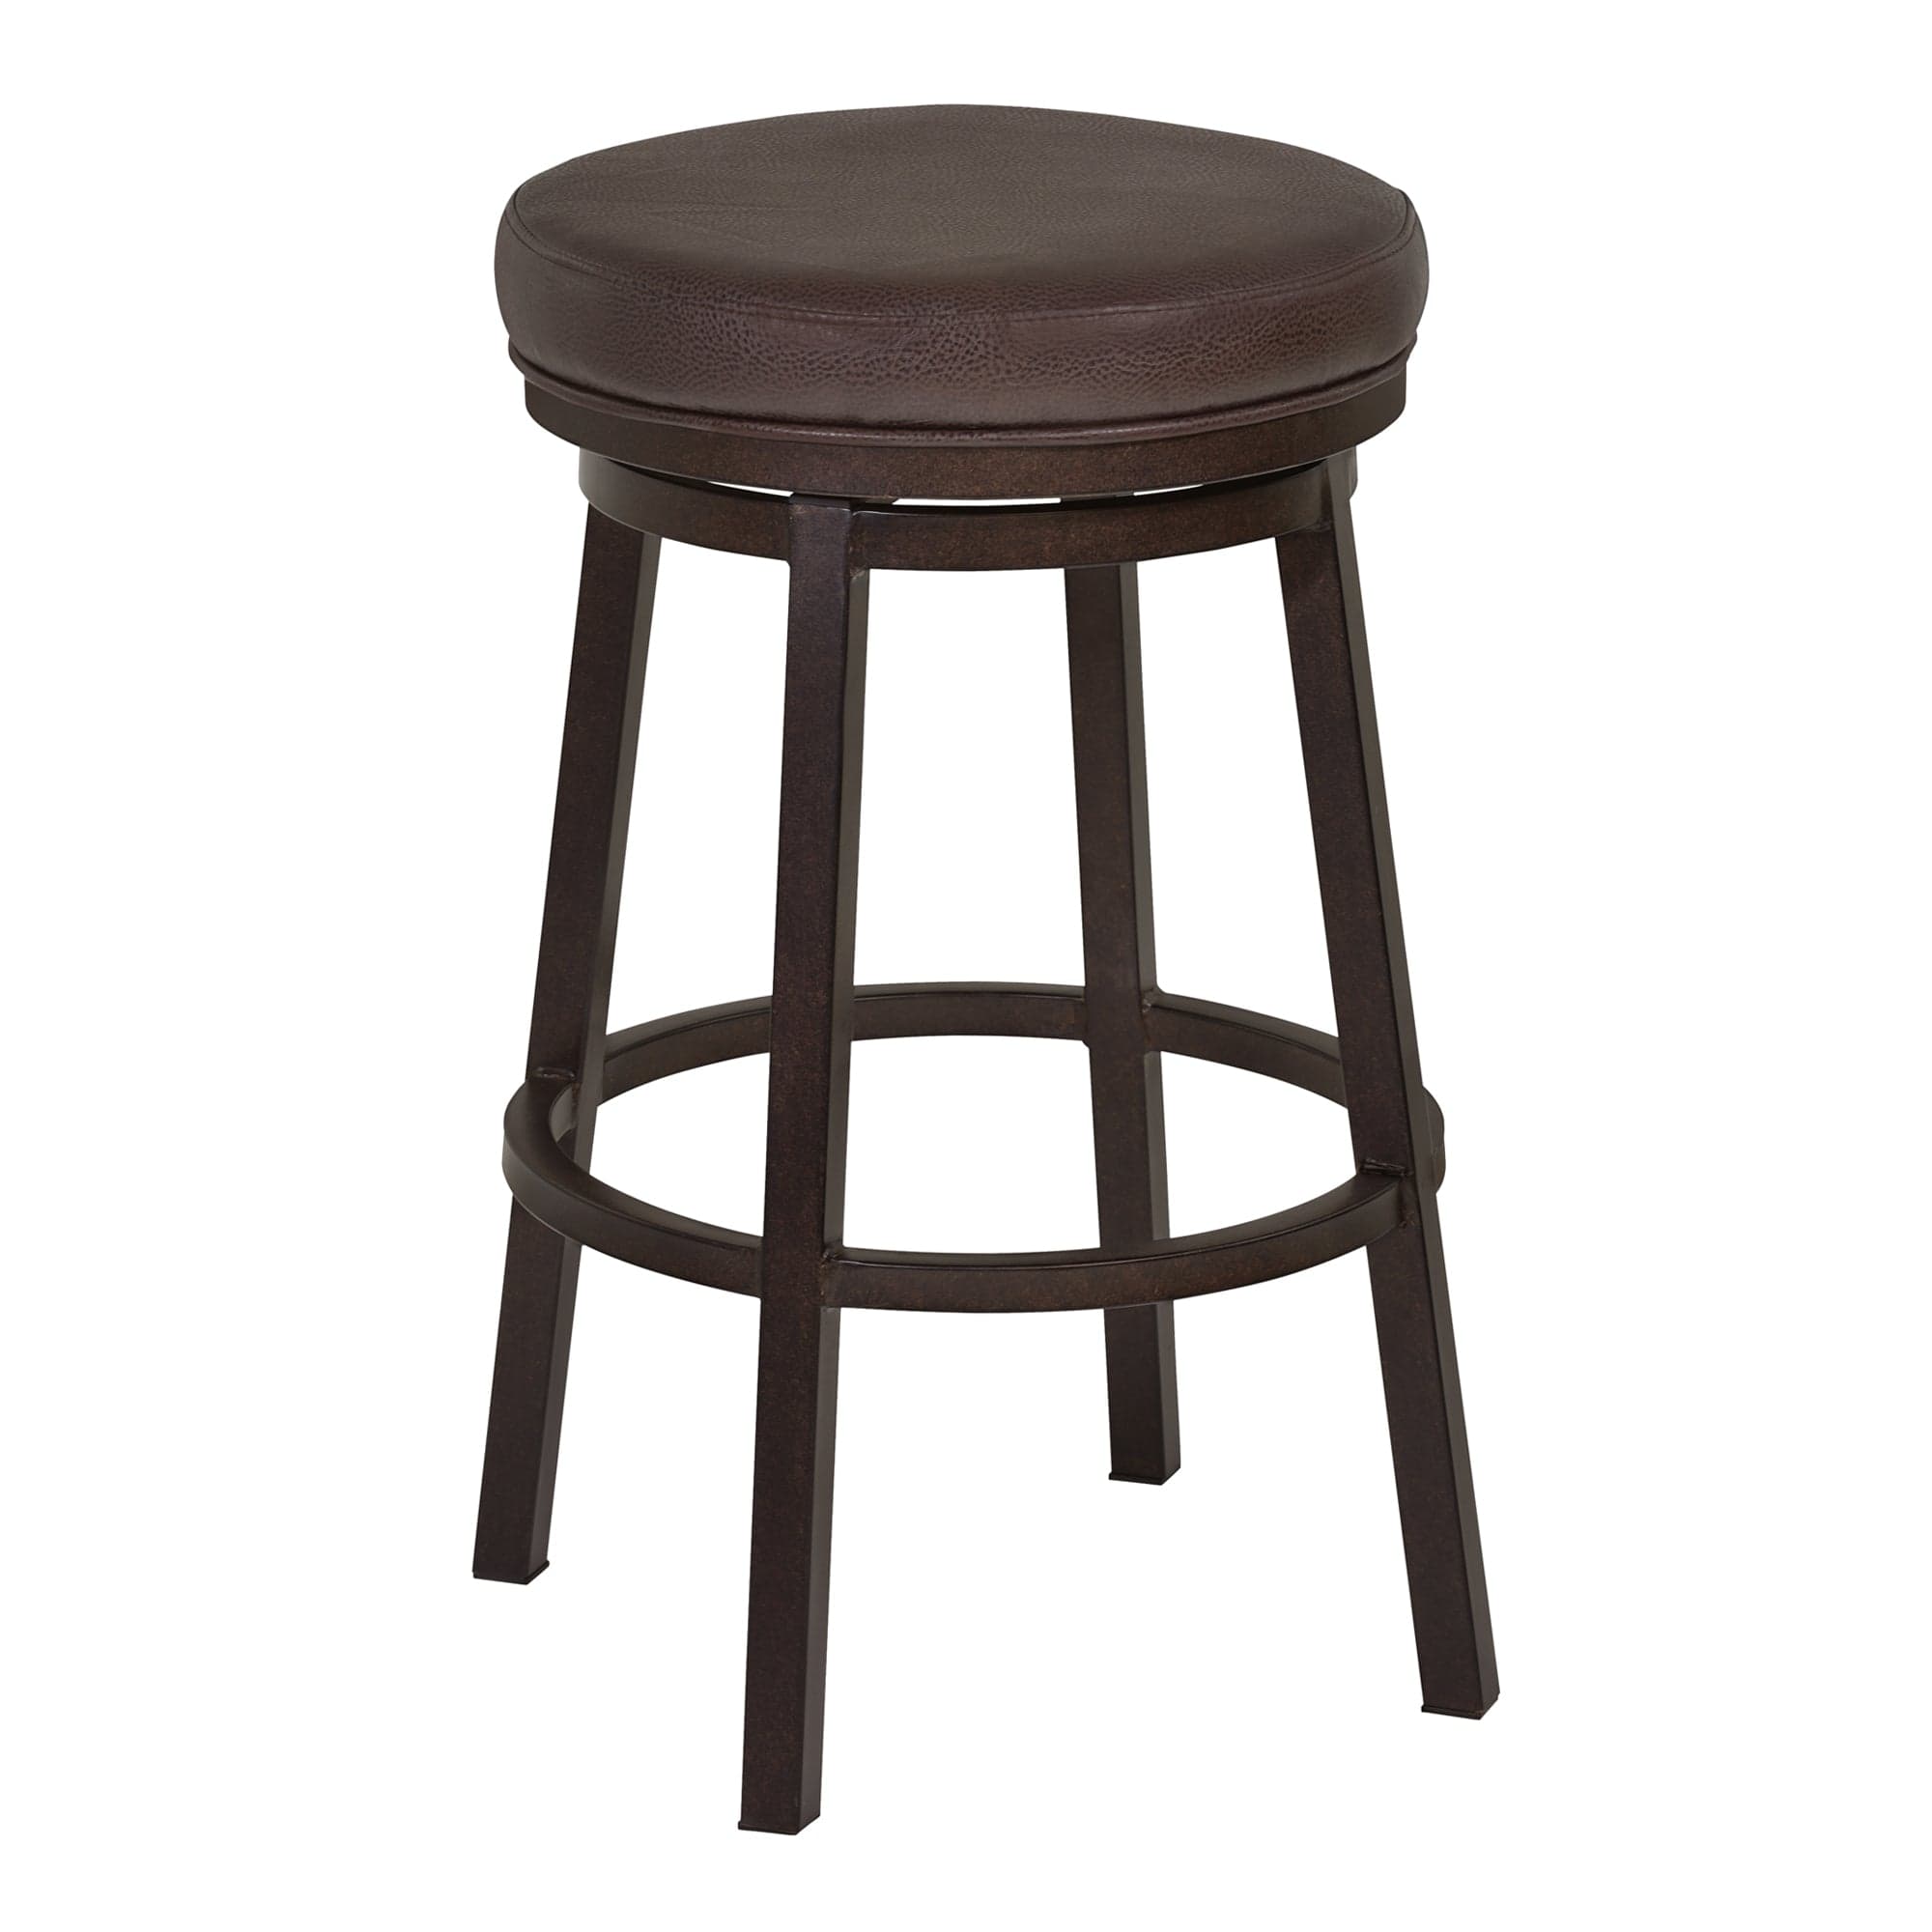 Armen Living Barstool Armen Living | Tilden 26" Counter Height Metal Swivel Backless Barstool in Ford Brown Faux Leather and Auburn Bay Finish | LCTIBABR26